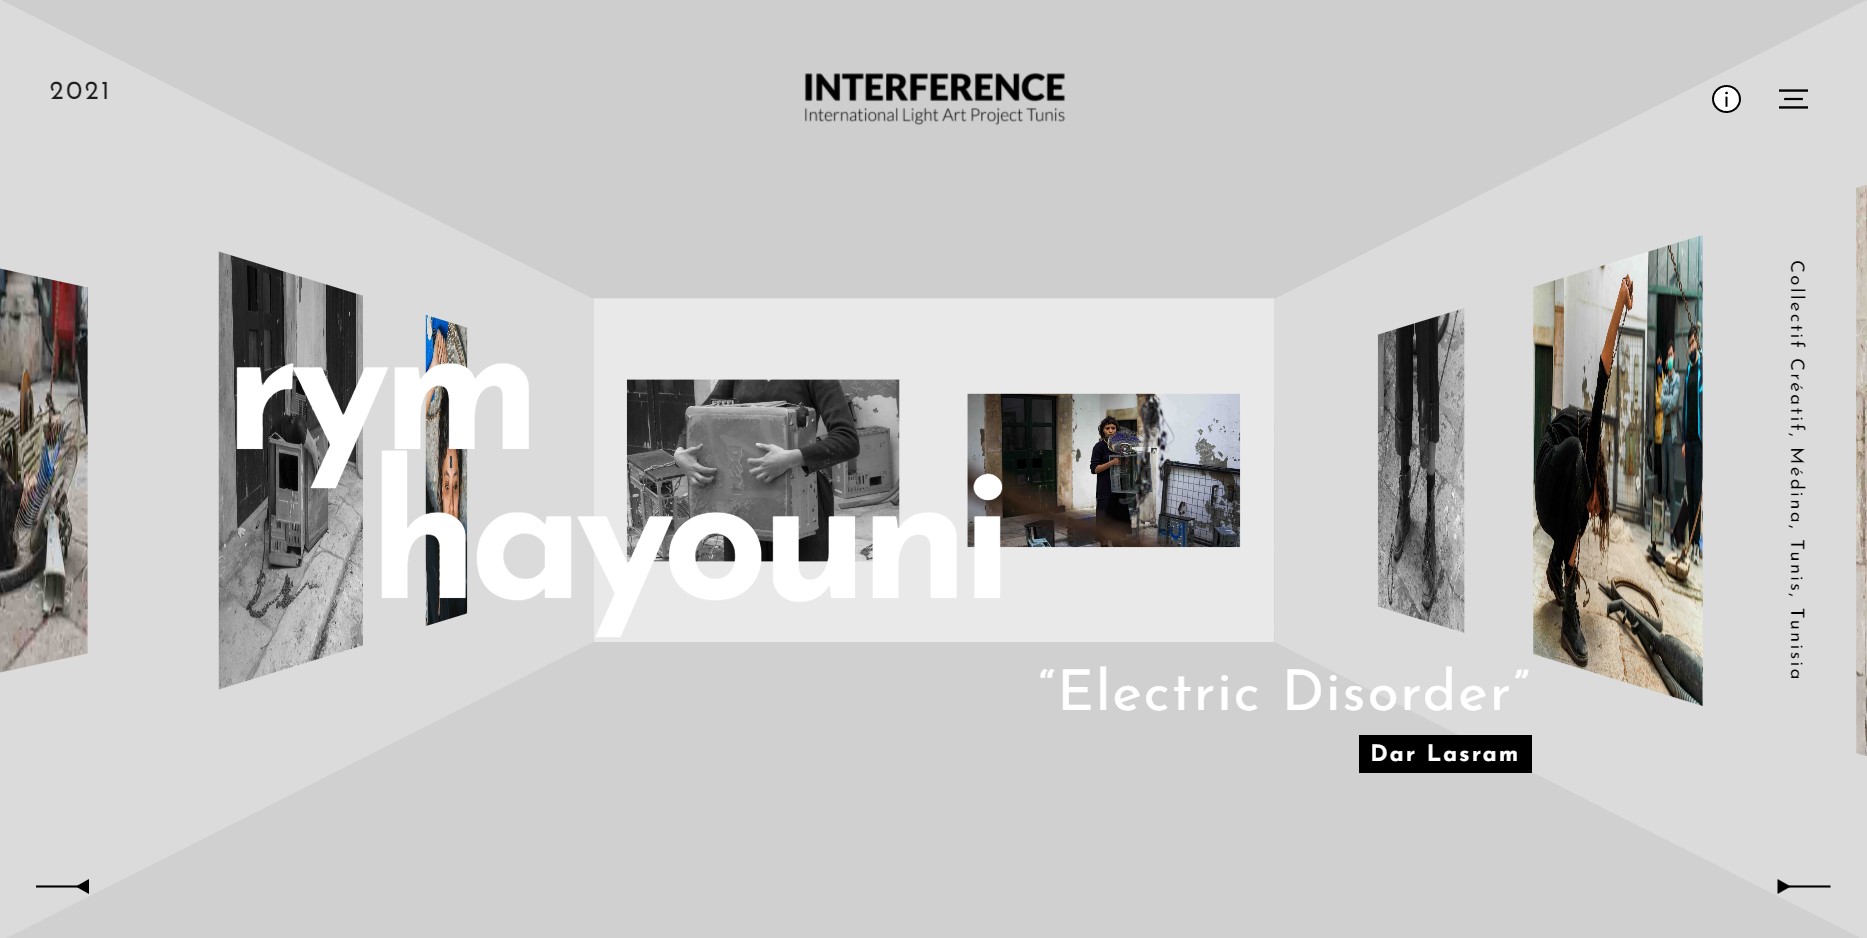 Exhibition-Interference-Tunis.com